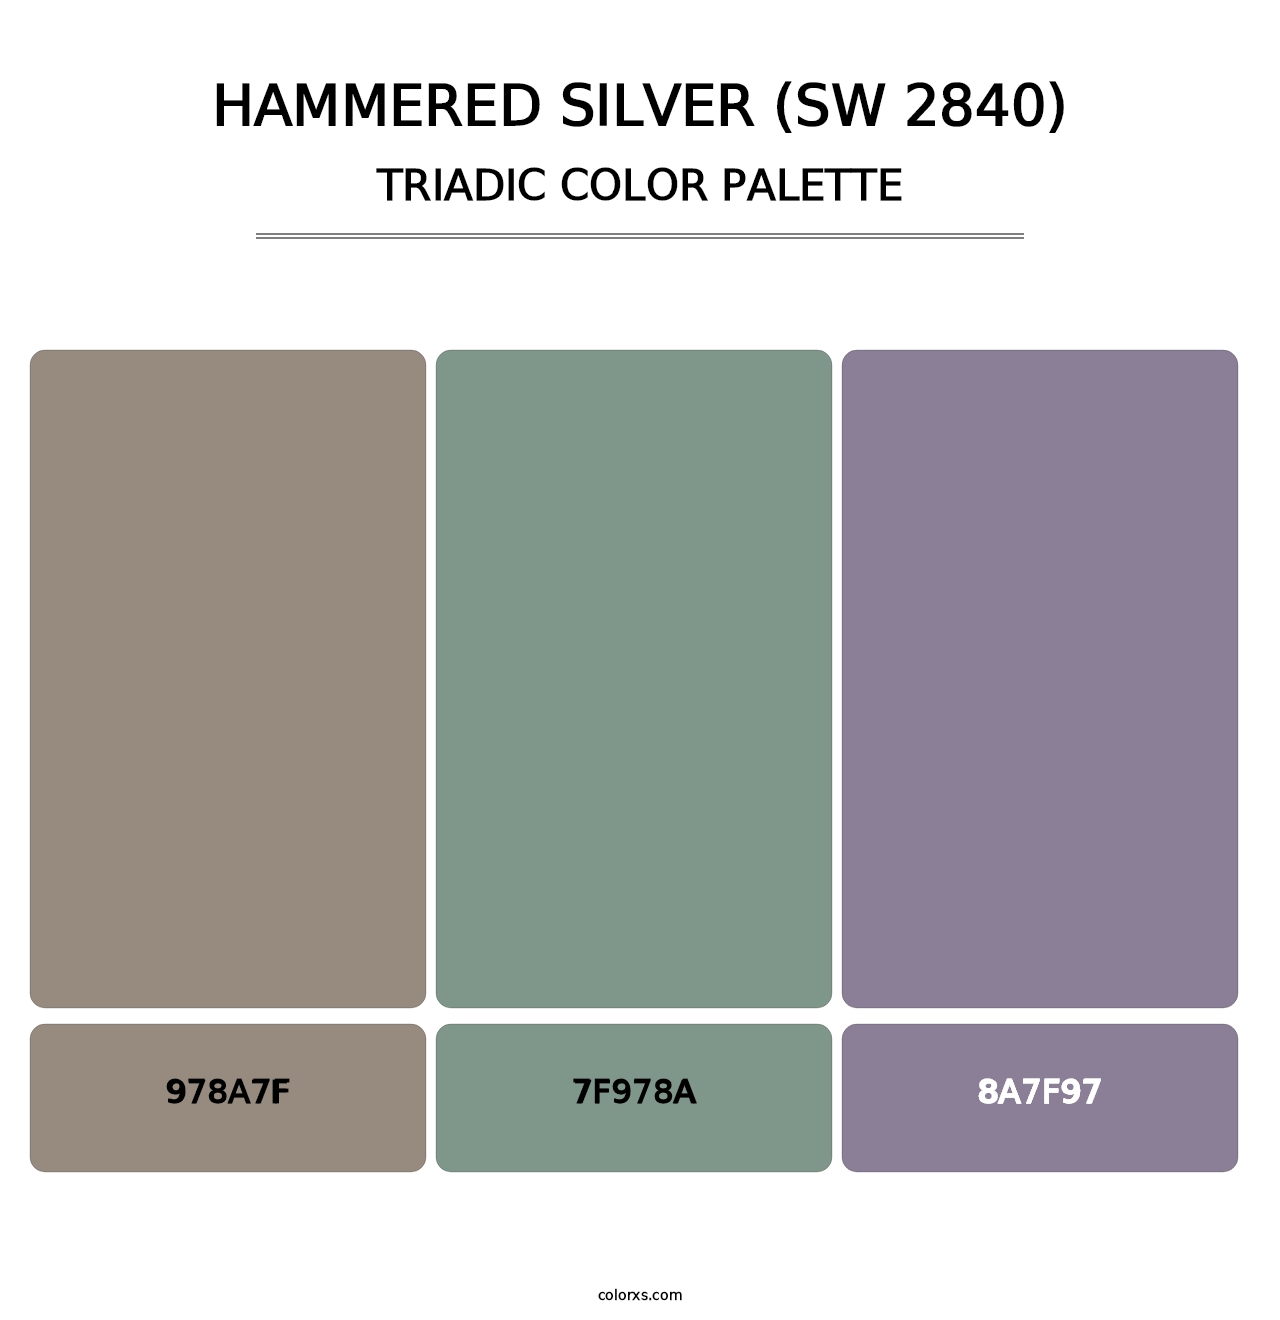 Hammered Silver (SW 2840) - Triadic Color Palette